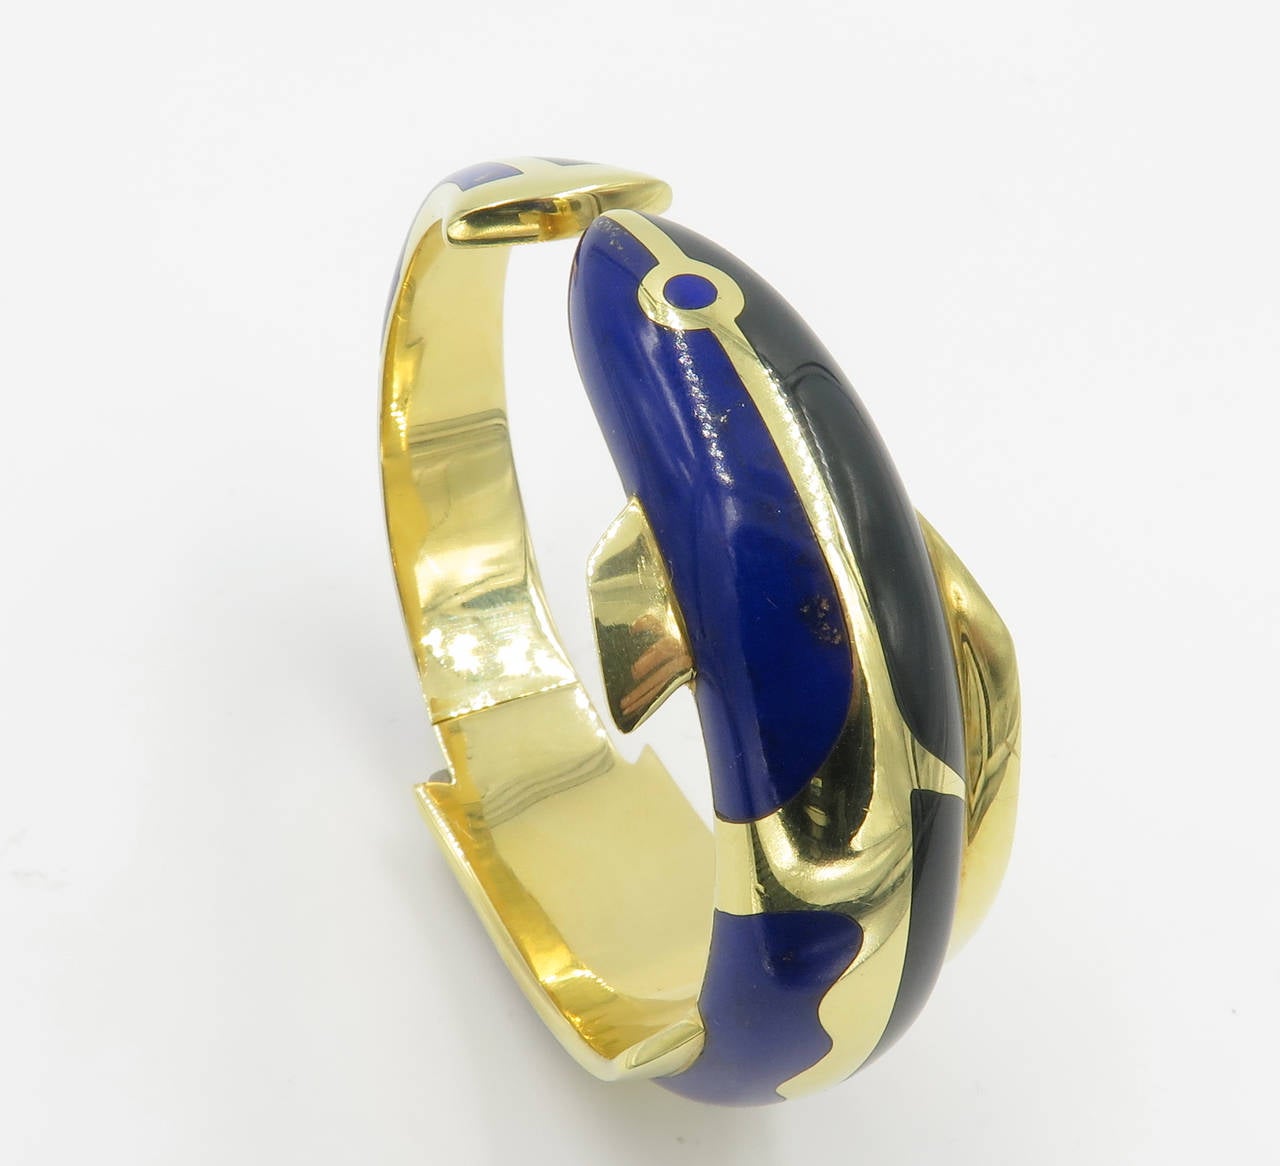 An 18 karat yellow gold, lapis lazuli and black jade hinged bangle bracelet, Tiffany & Co., Circa 1975.  The bracelet is designed in the form of a fish with gold fins and tail, inlaid with sections of black jade and lapis lazuli.  The bracelet has a